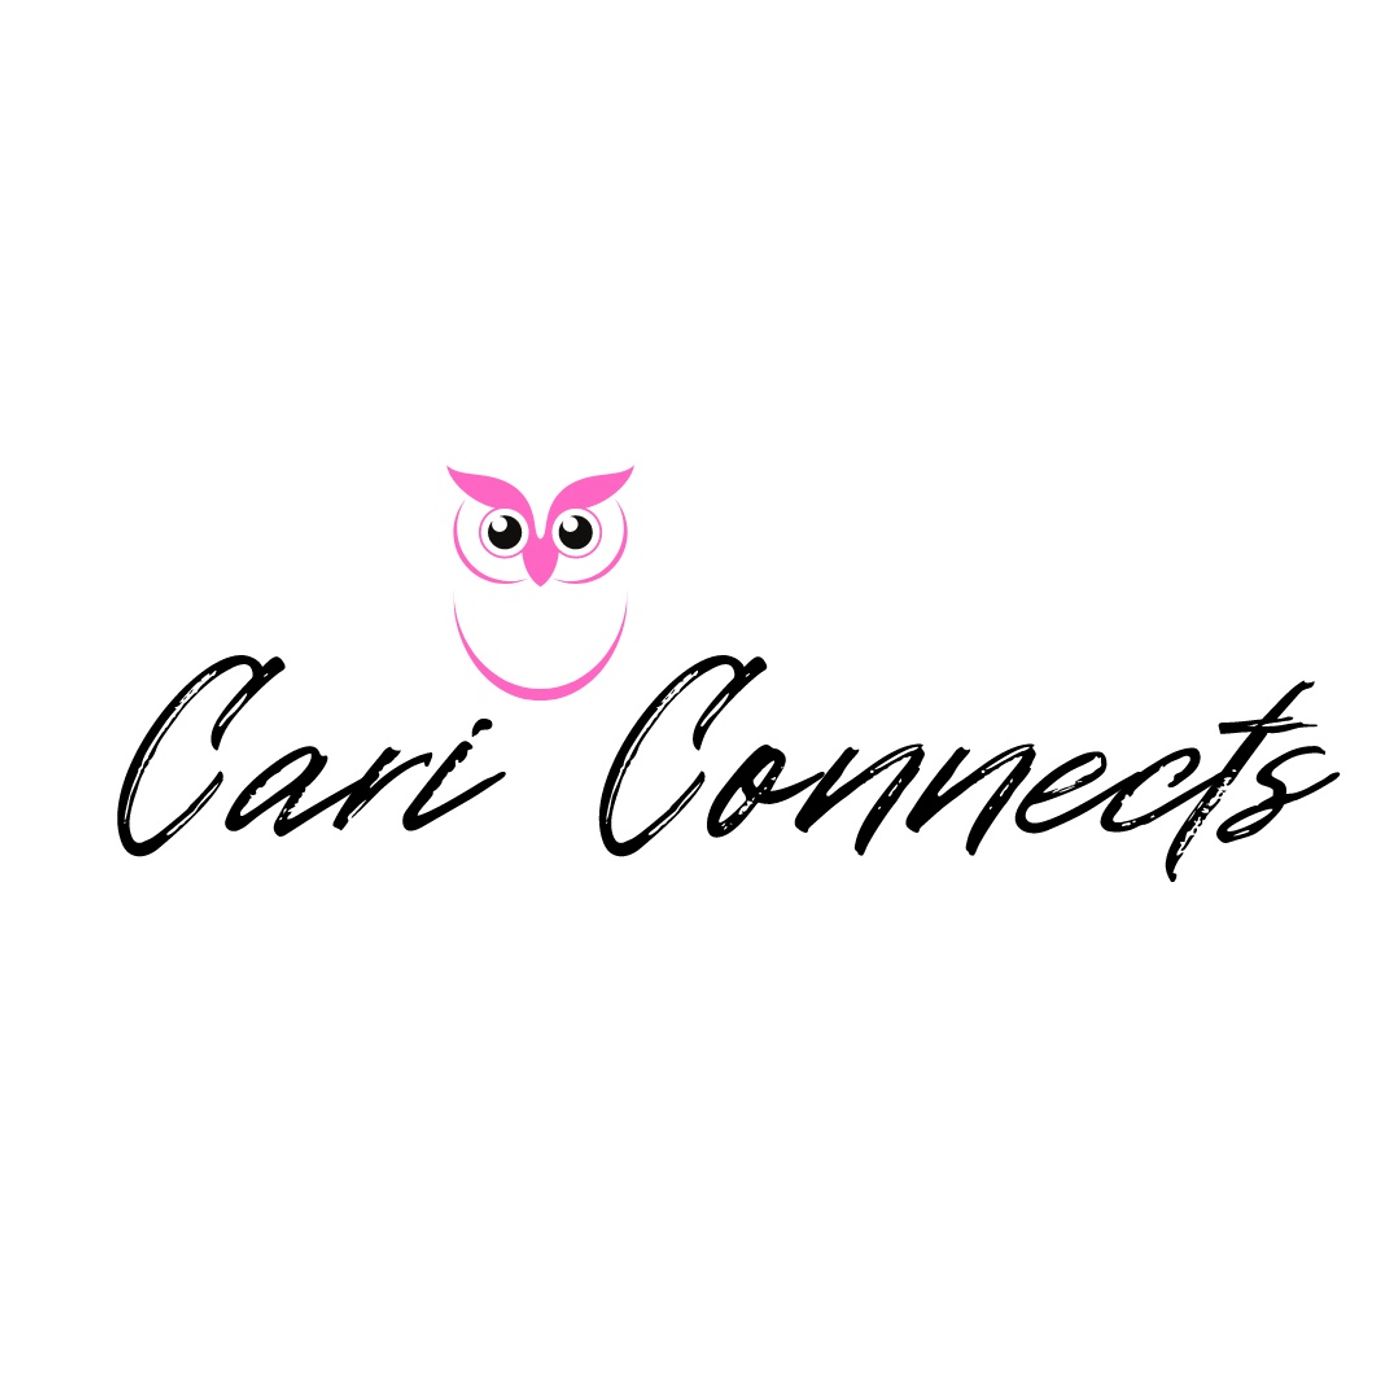 Cari Connects March 28th